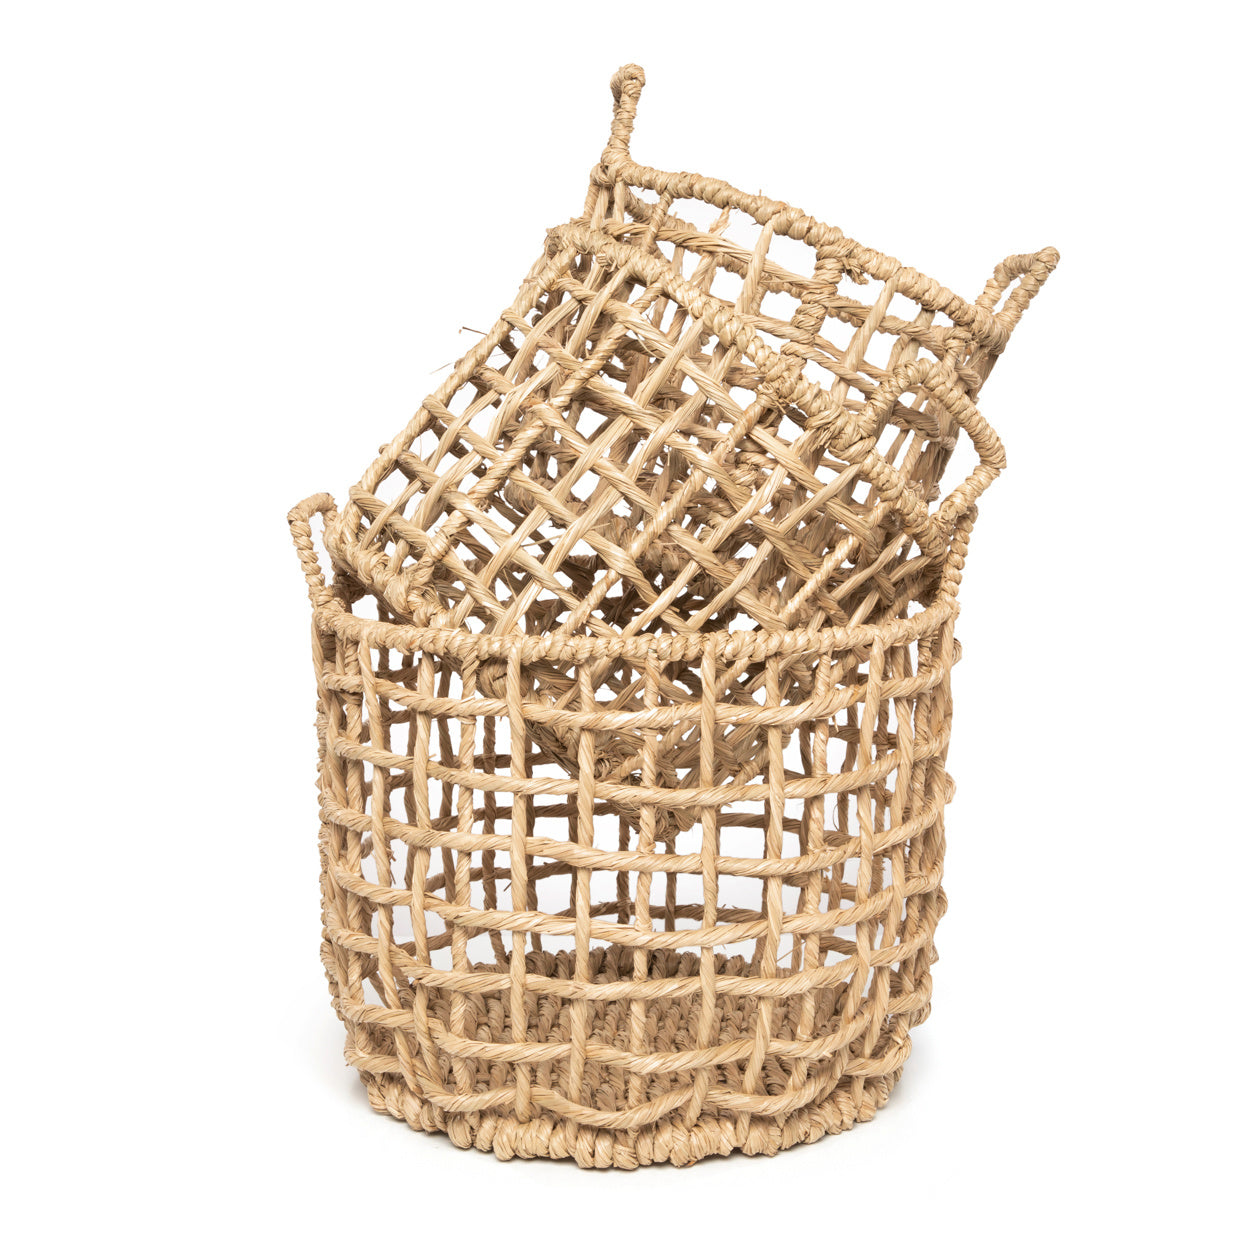 THE CUA DAI Baskets Set of 3 folded front view